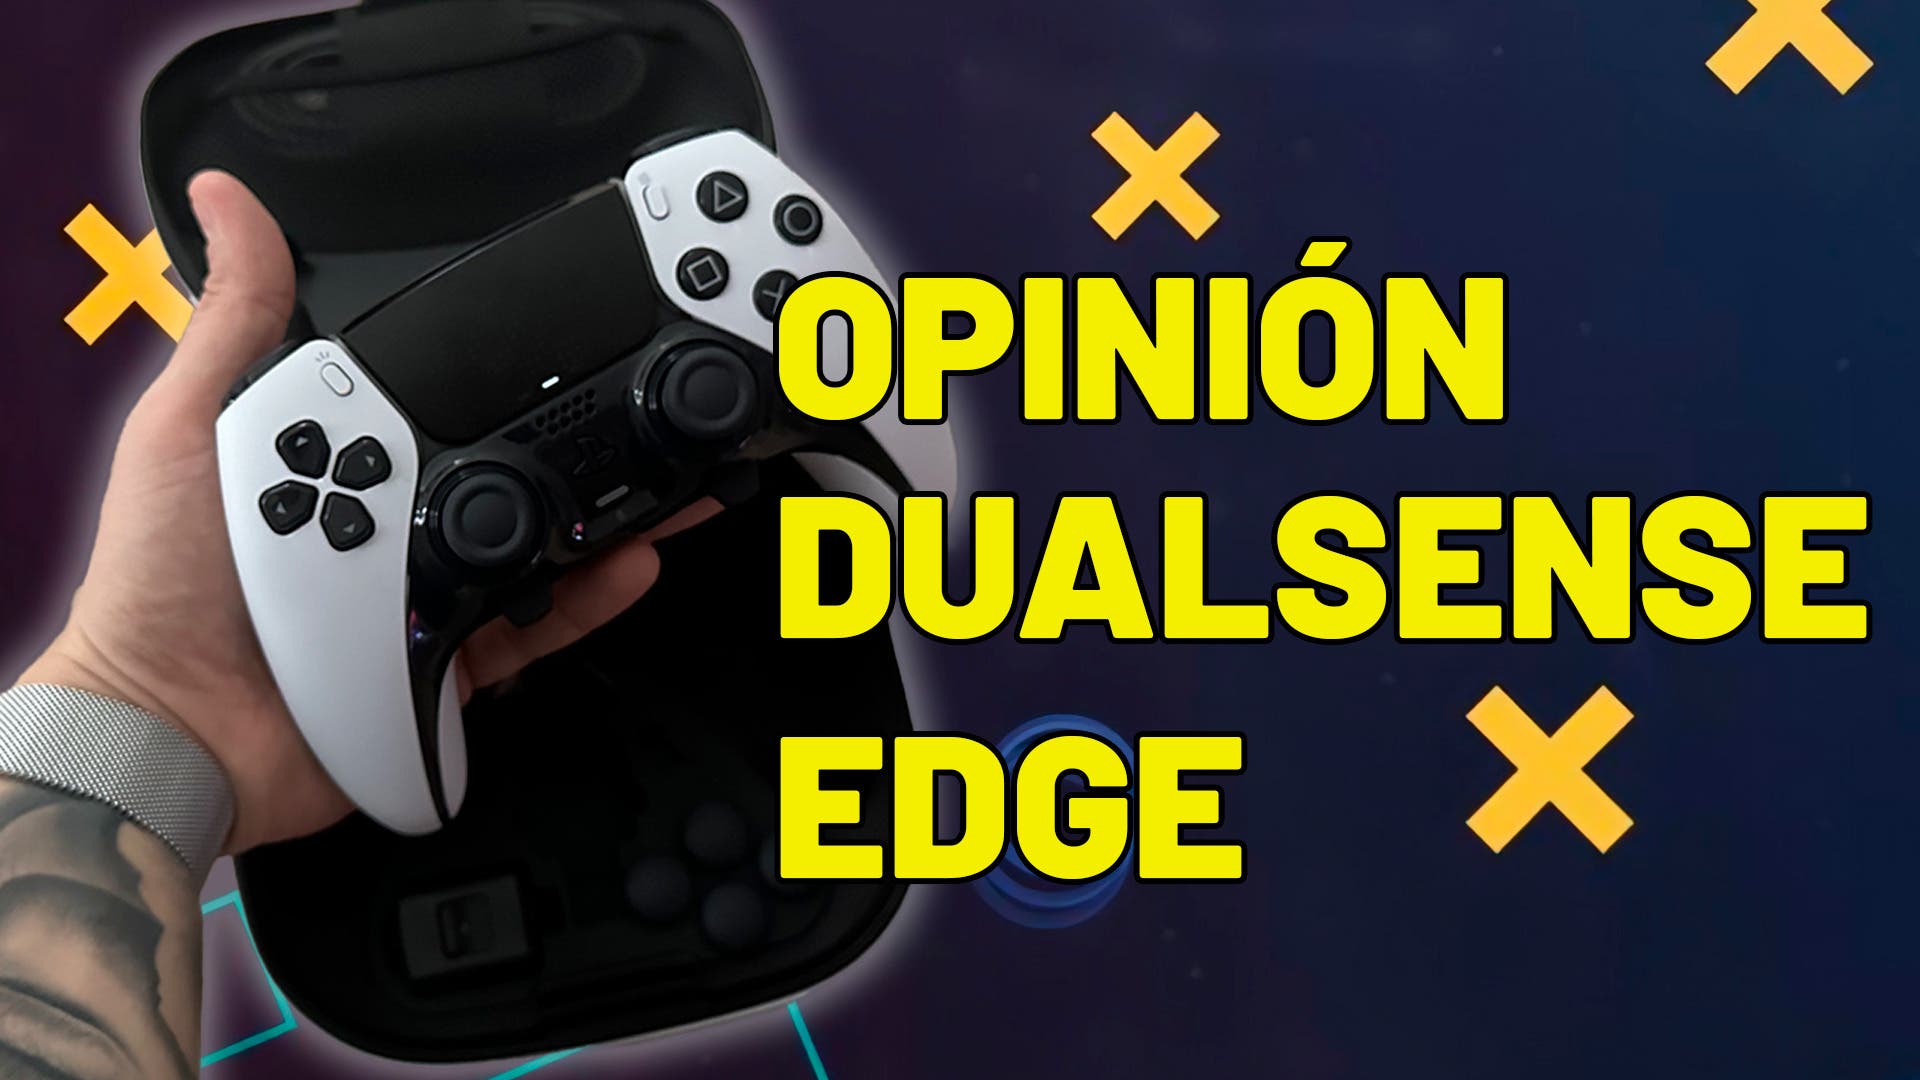 DualSense Edge analysis: is the new PS5 controller worth it?